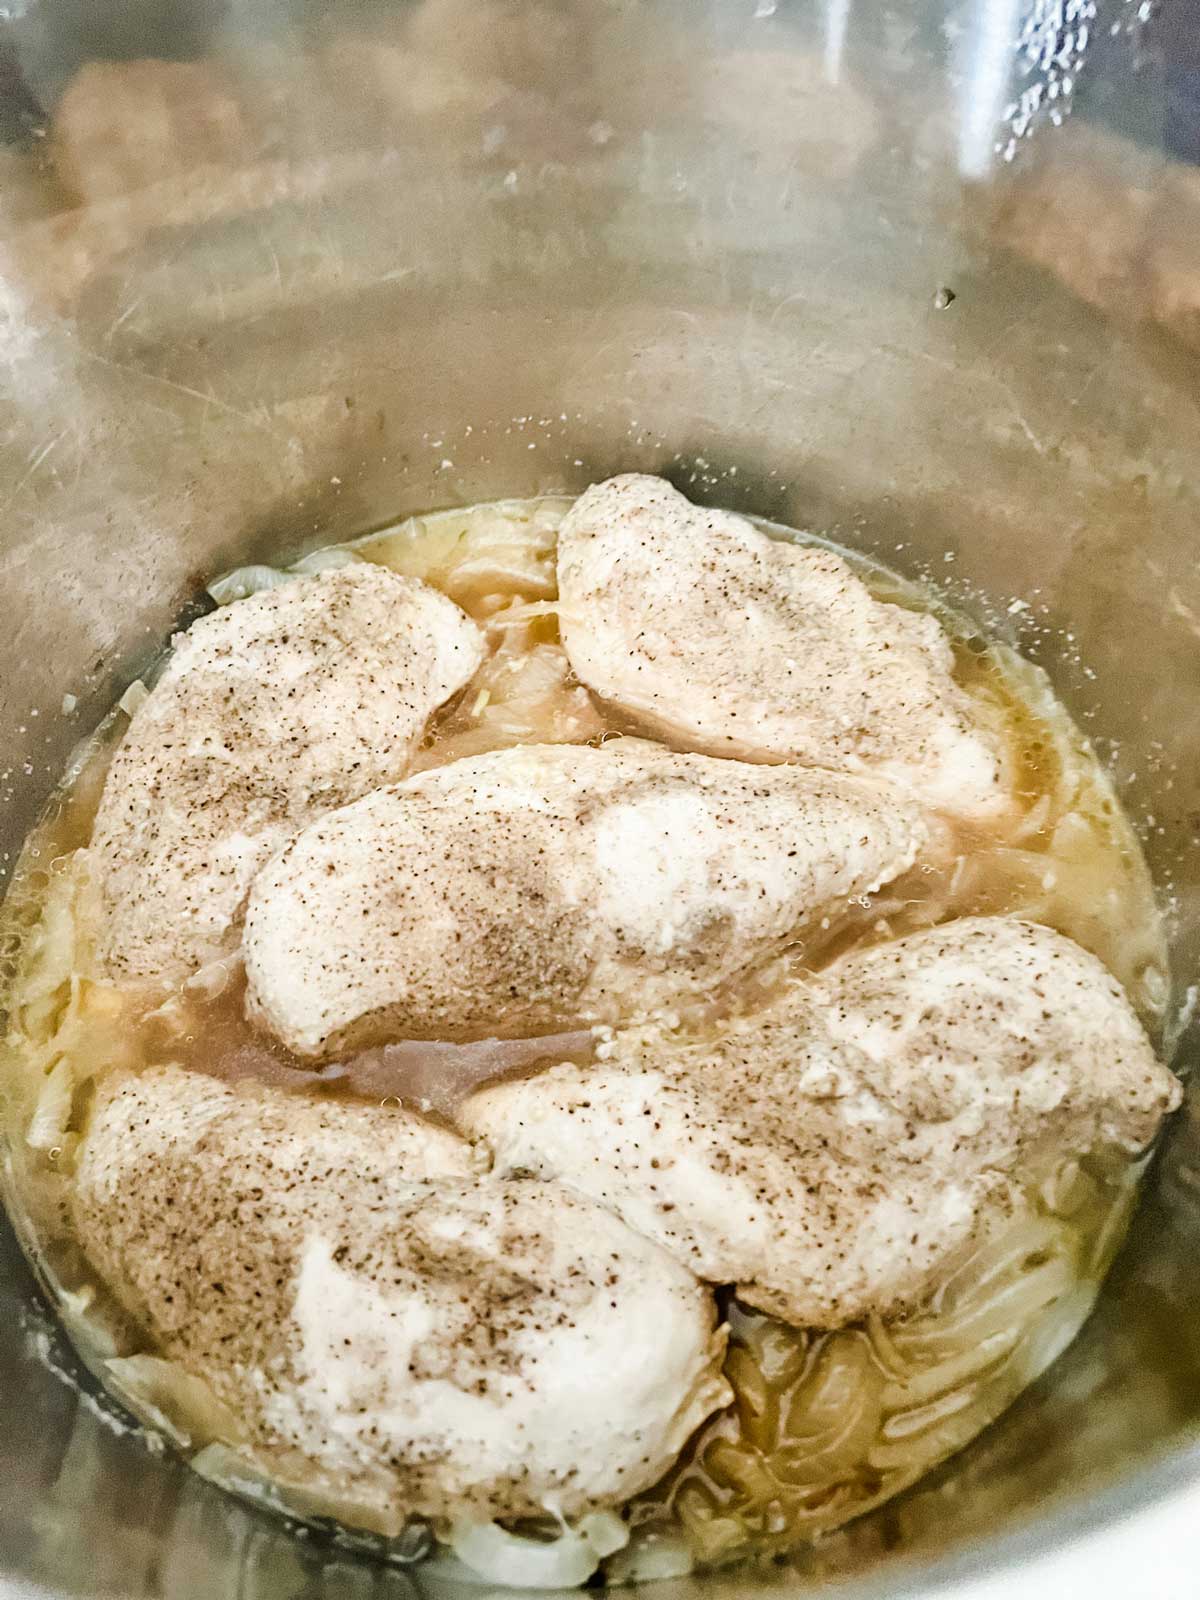 Chicken in a broth that has been cooked in an Instant Pot.